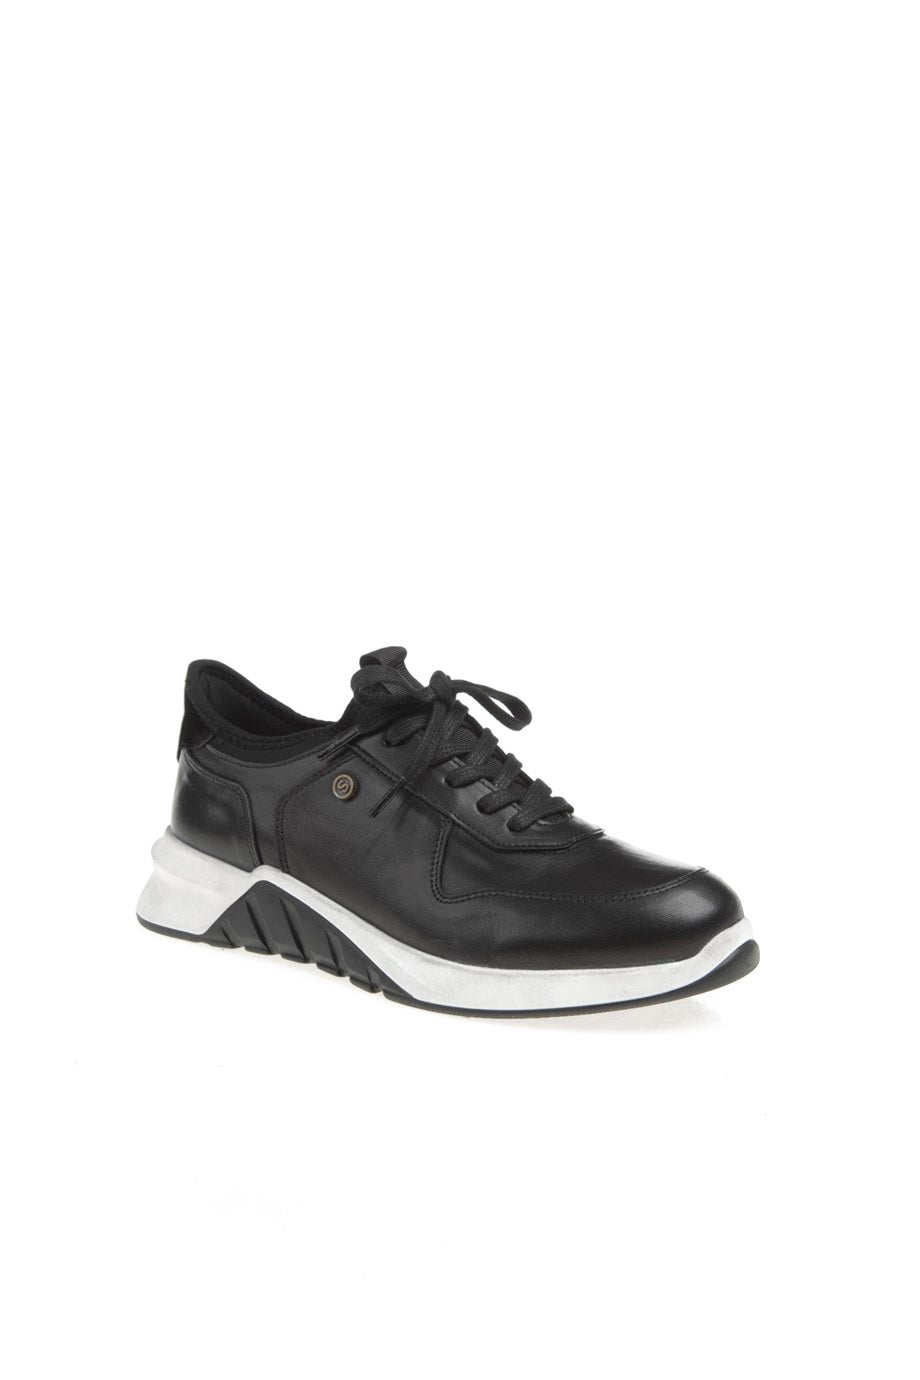 Rubber Sole Genuine Leather Sports Shoes - MENSTYLEWITH